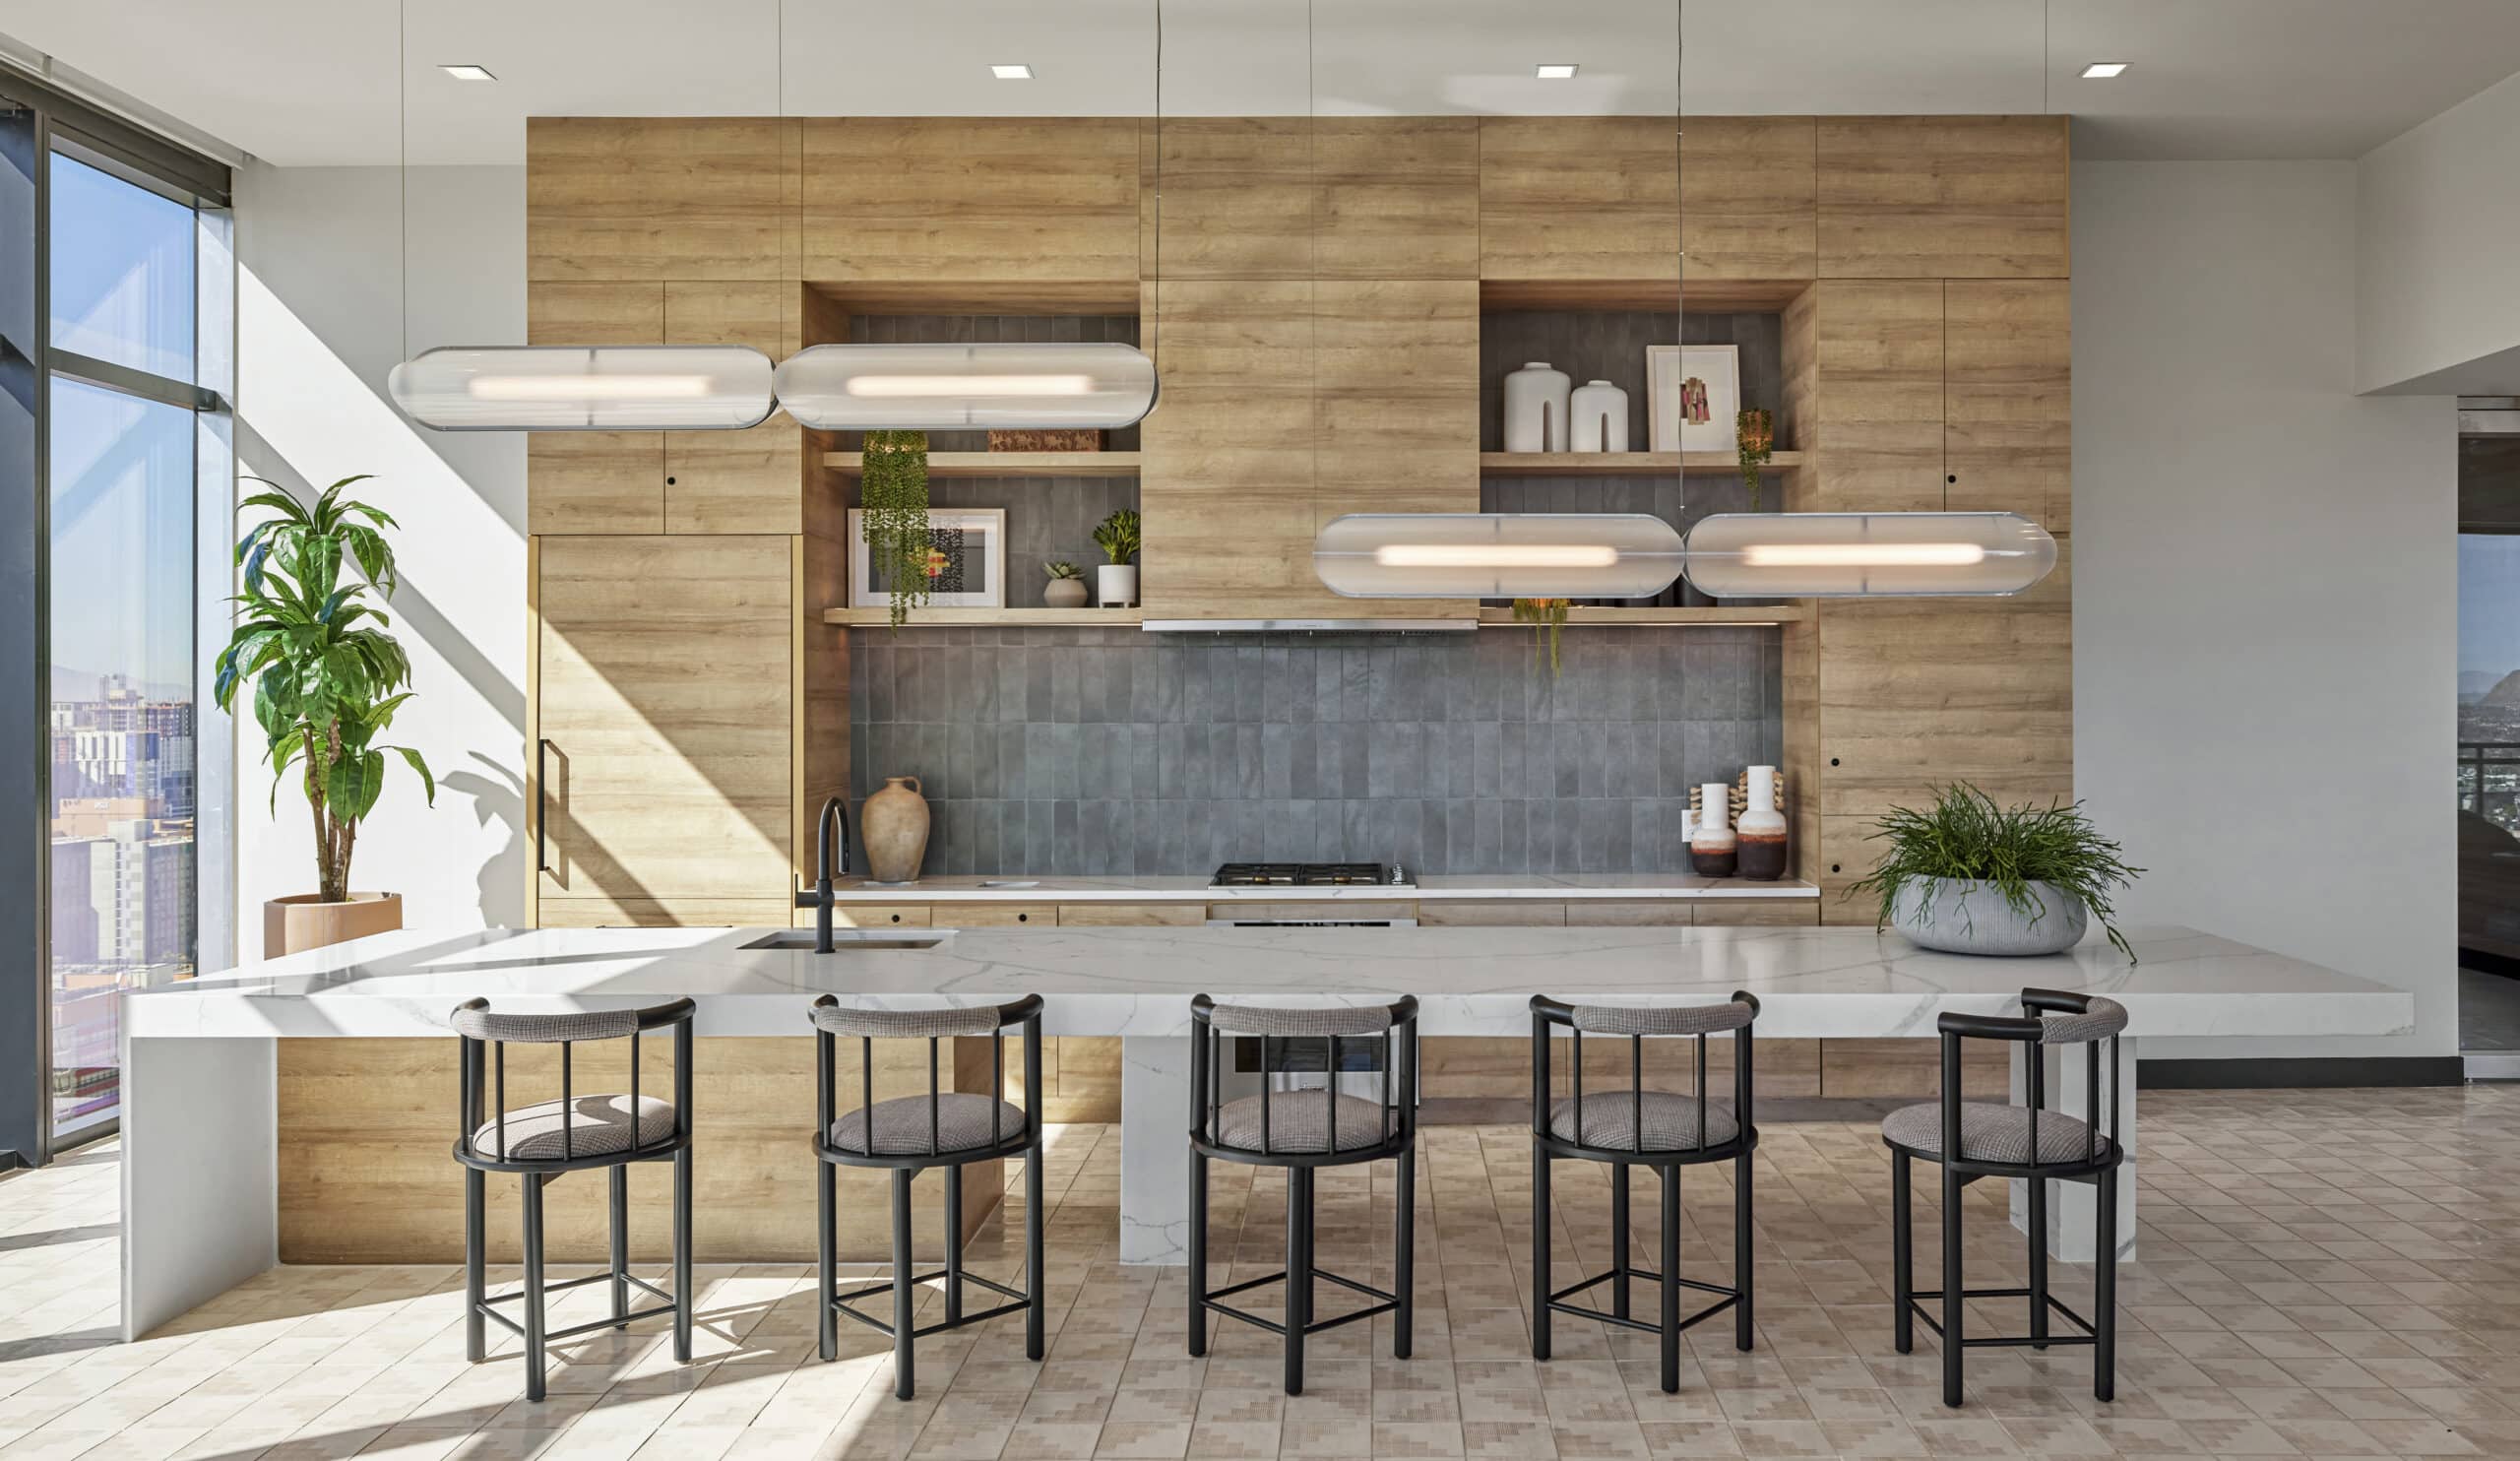 Community kitchen space with bar stools